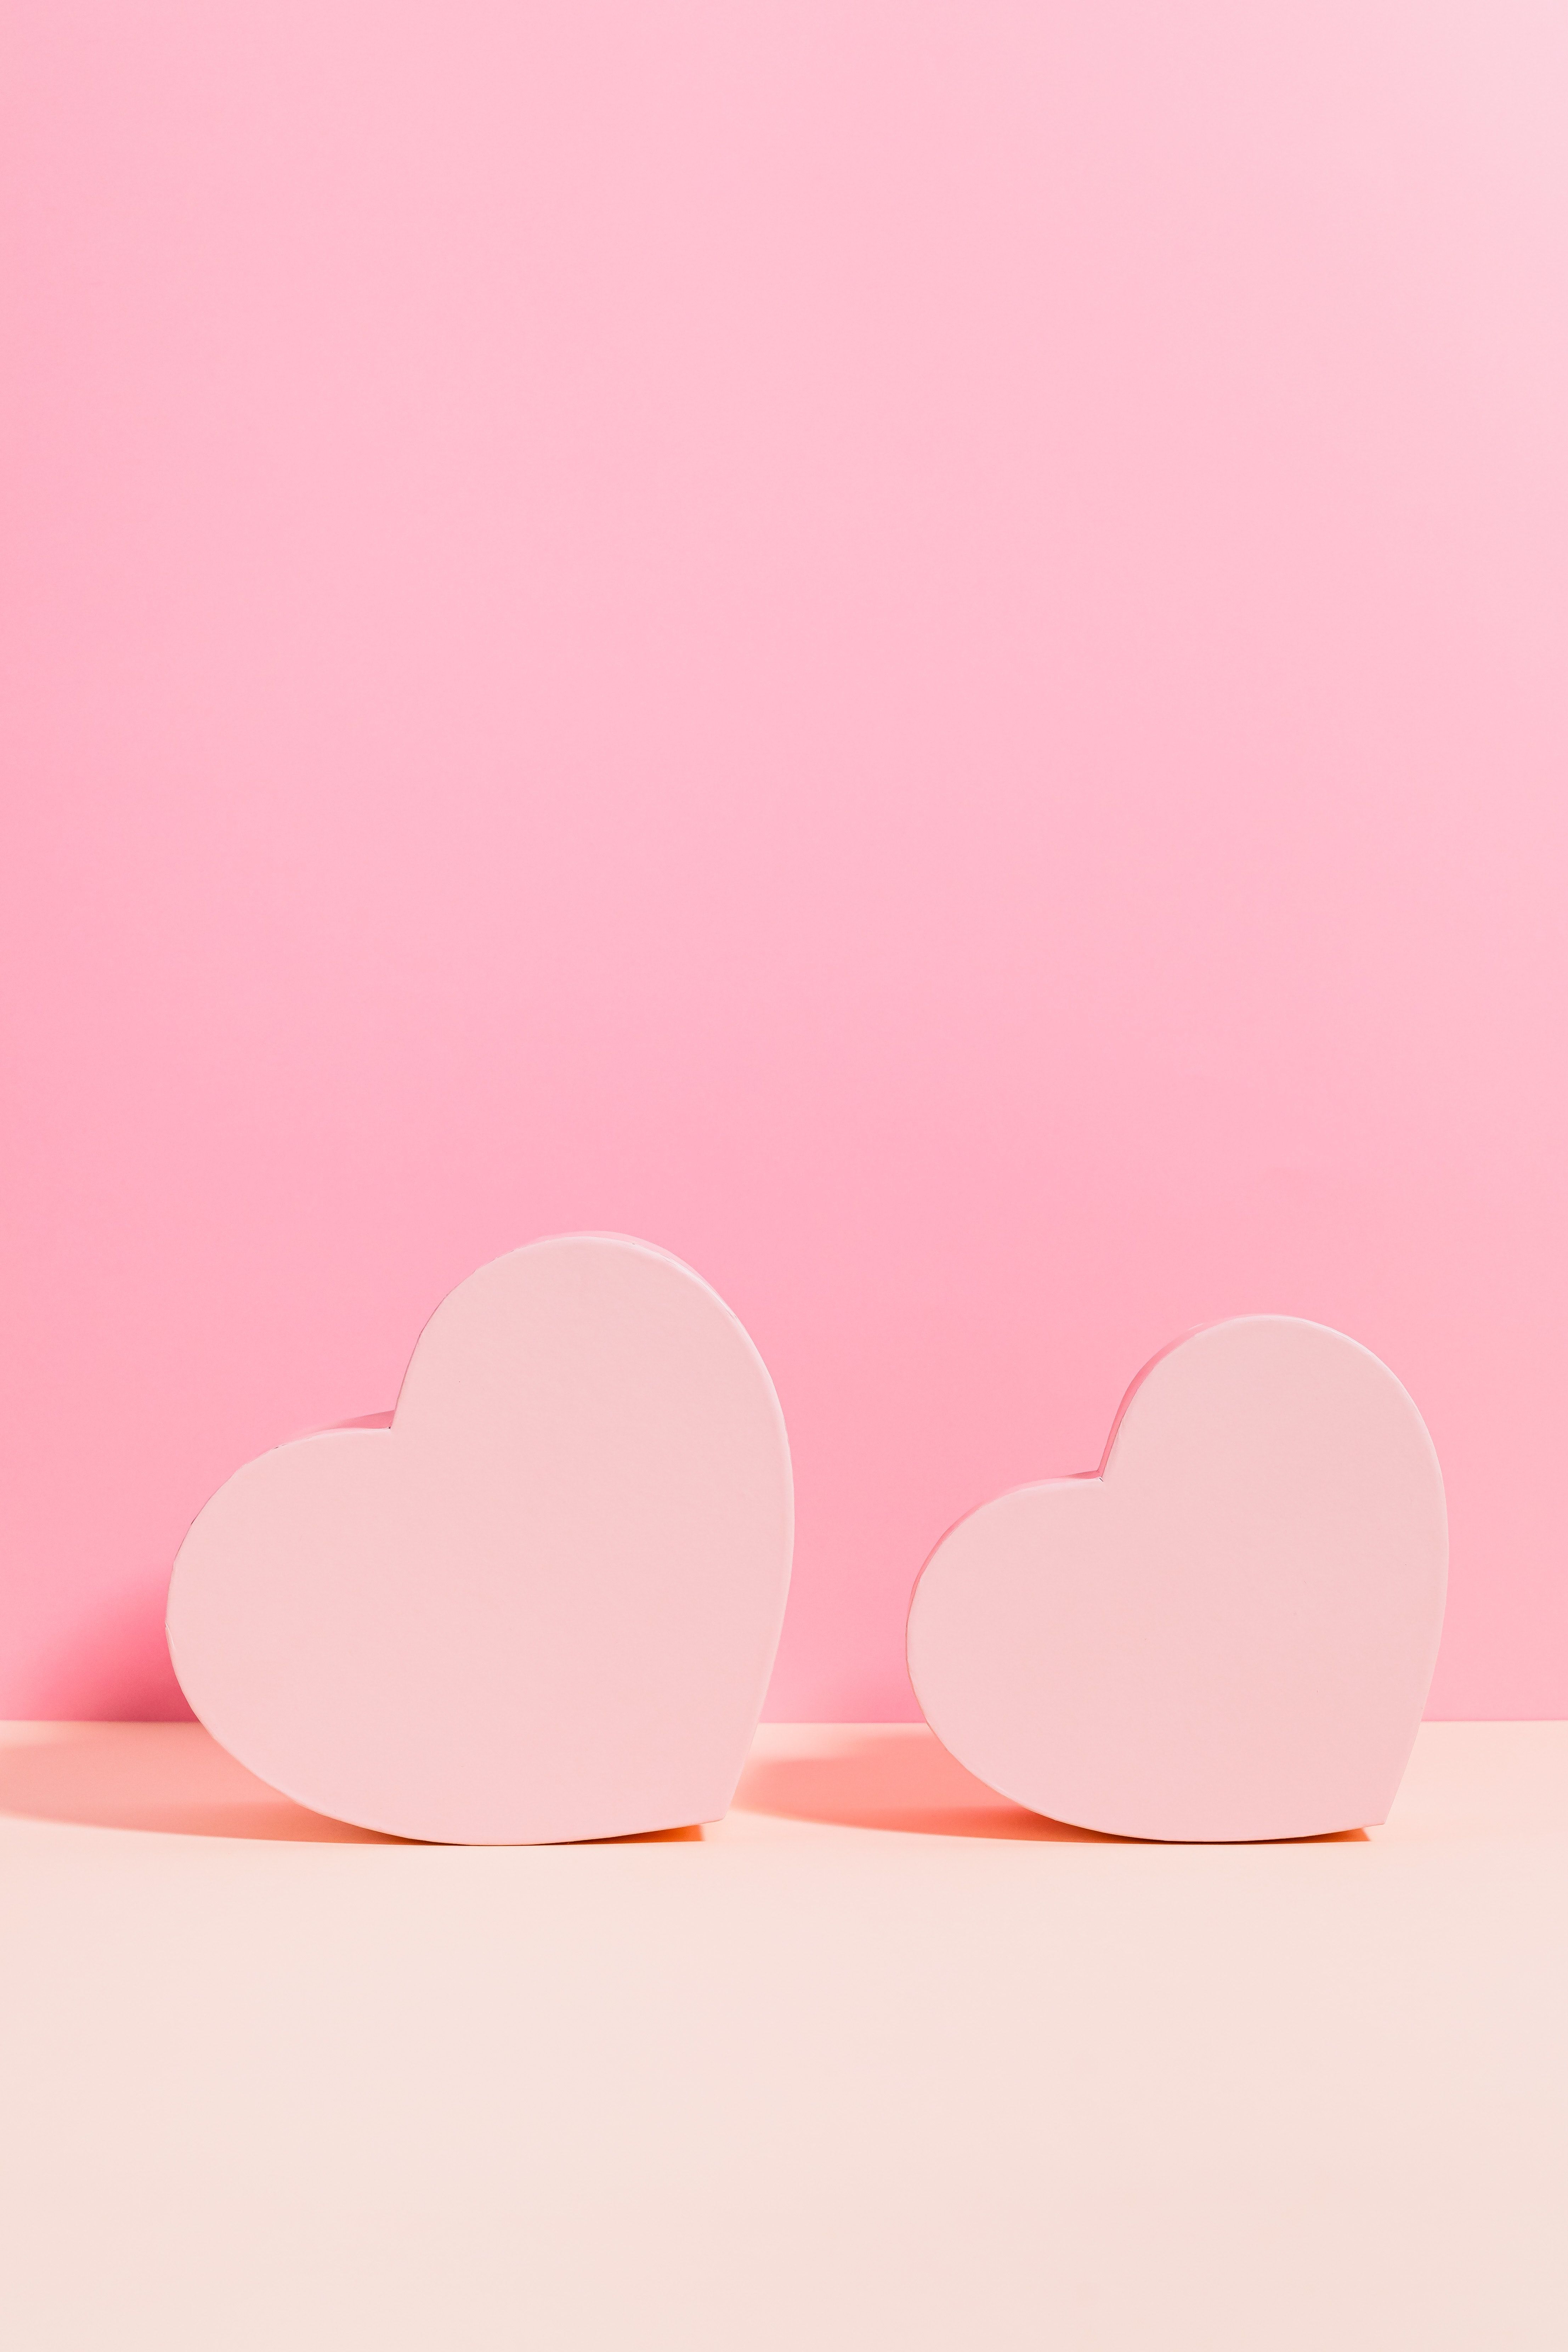 A photo of two pink hearts on a pink and beige background - Pink heart